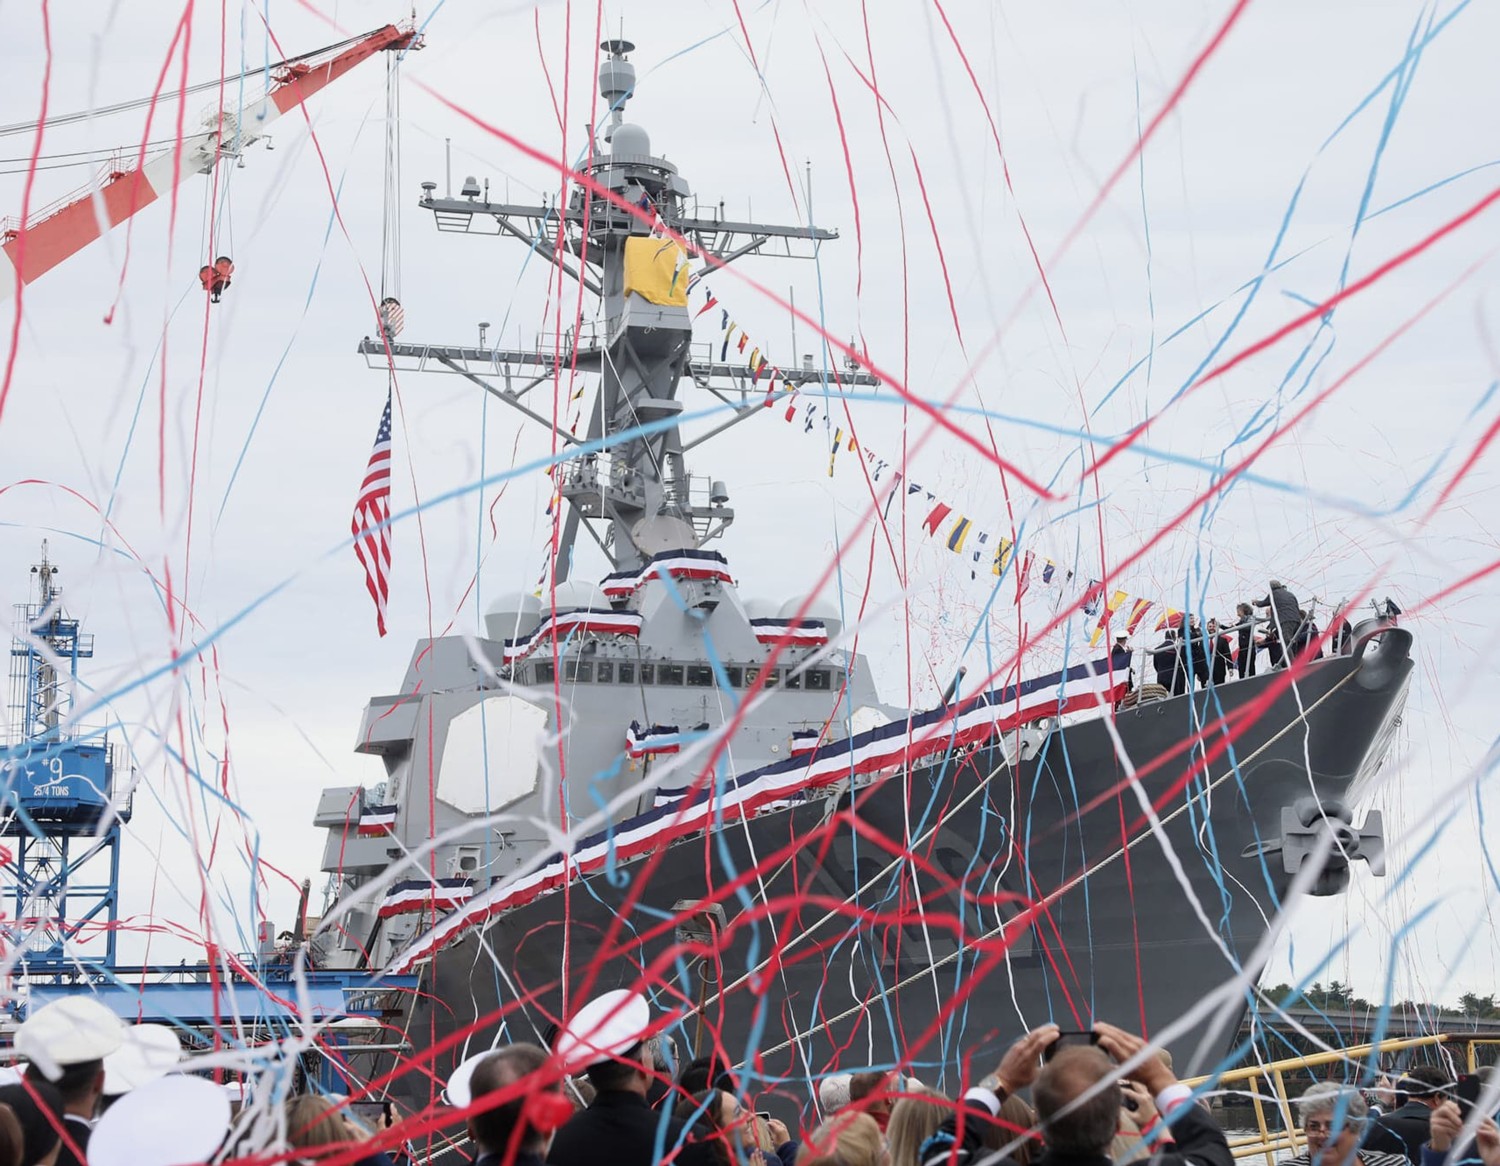 ddg-120 uss carl m. levin arleigh burke class guided missile destroyer aegis us navy christening bath iron works maine 35